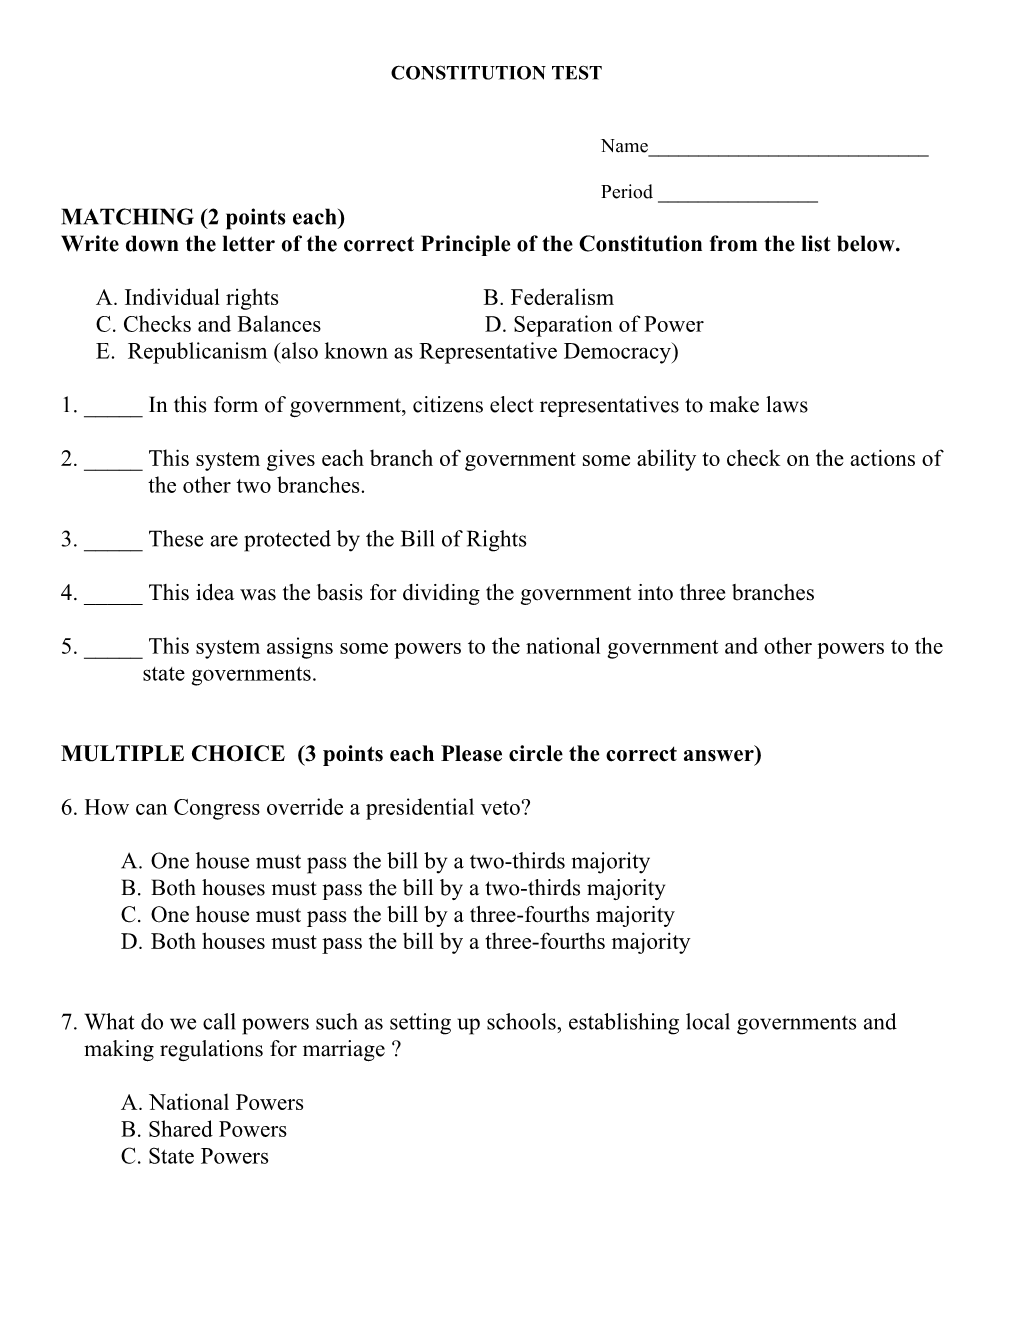 Constitution Test Questions